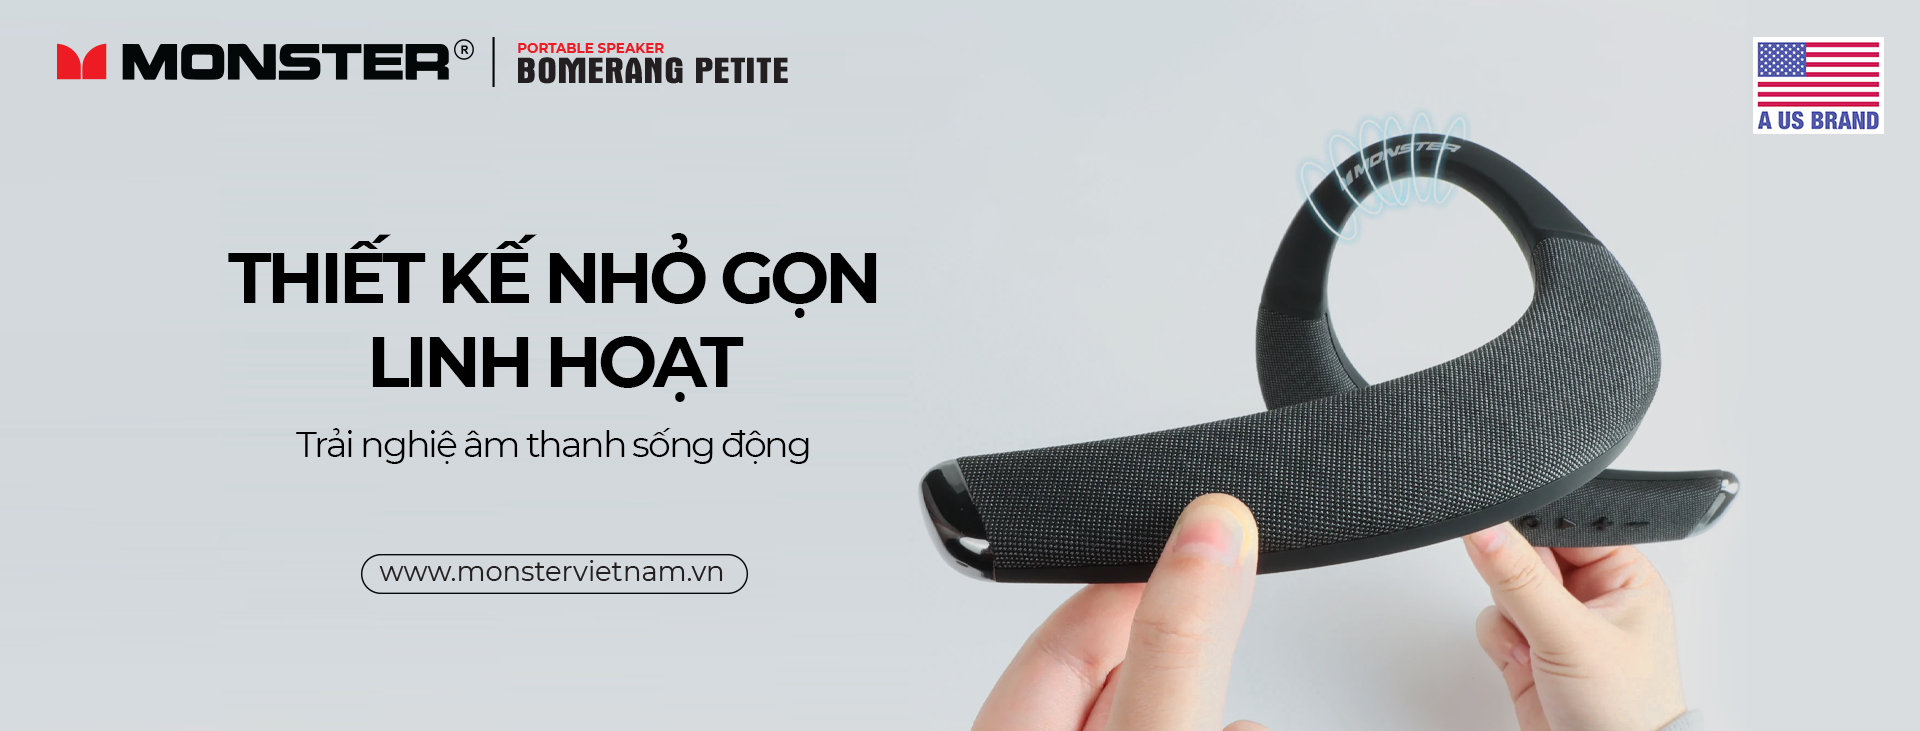 Loa Bluetooth Monster Boomerang Petite | Anh Duy Audio